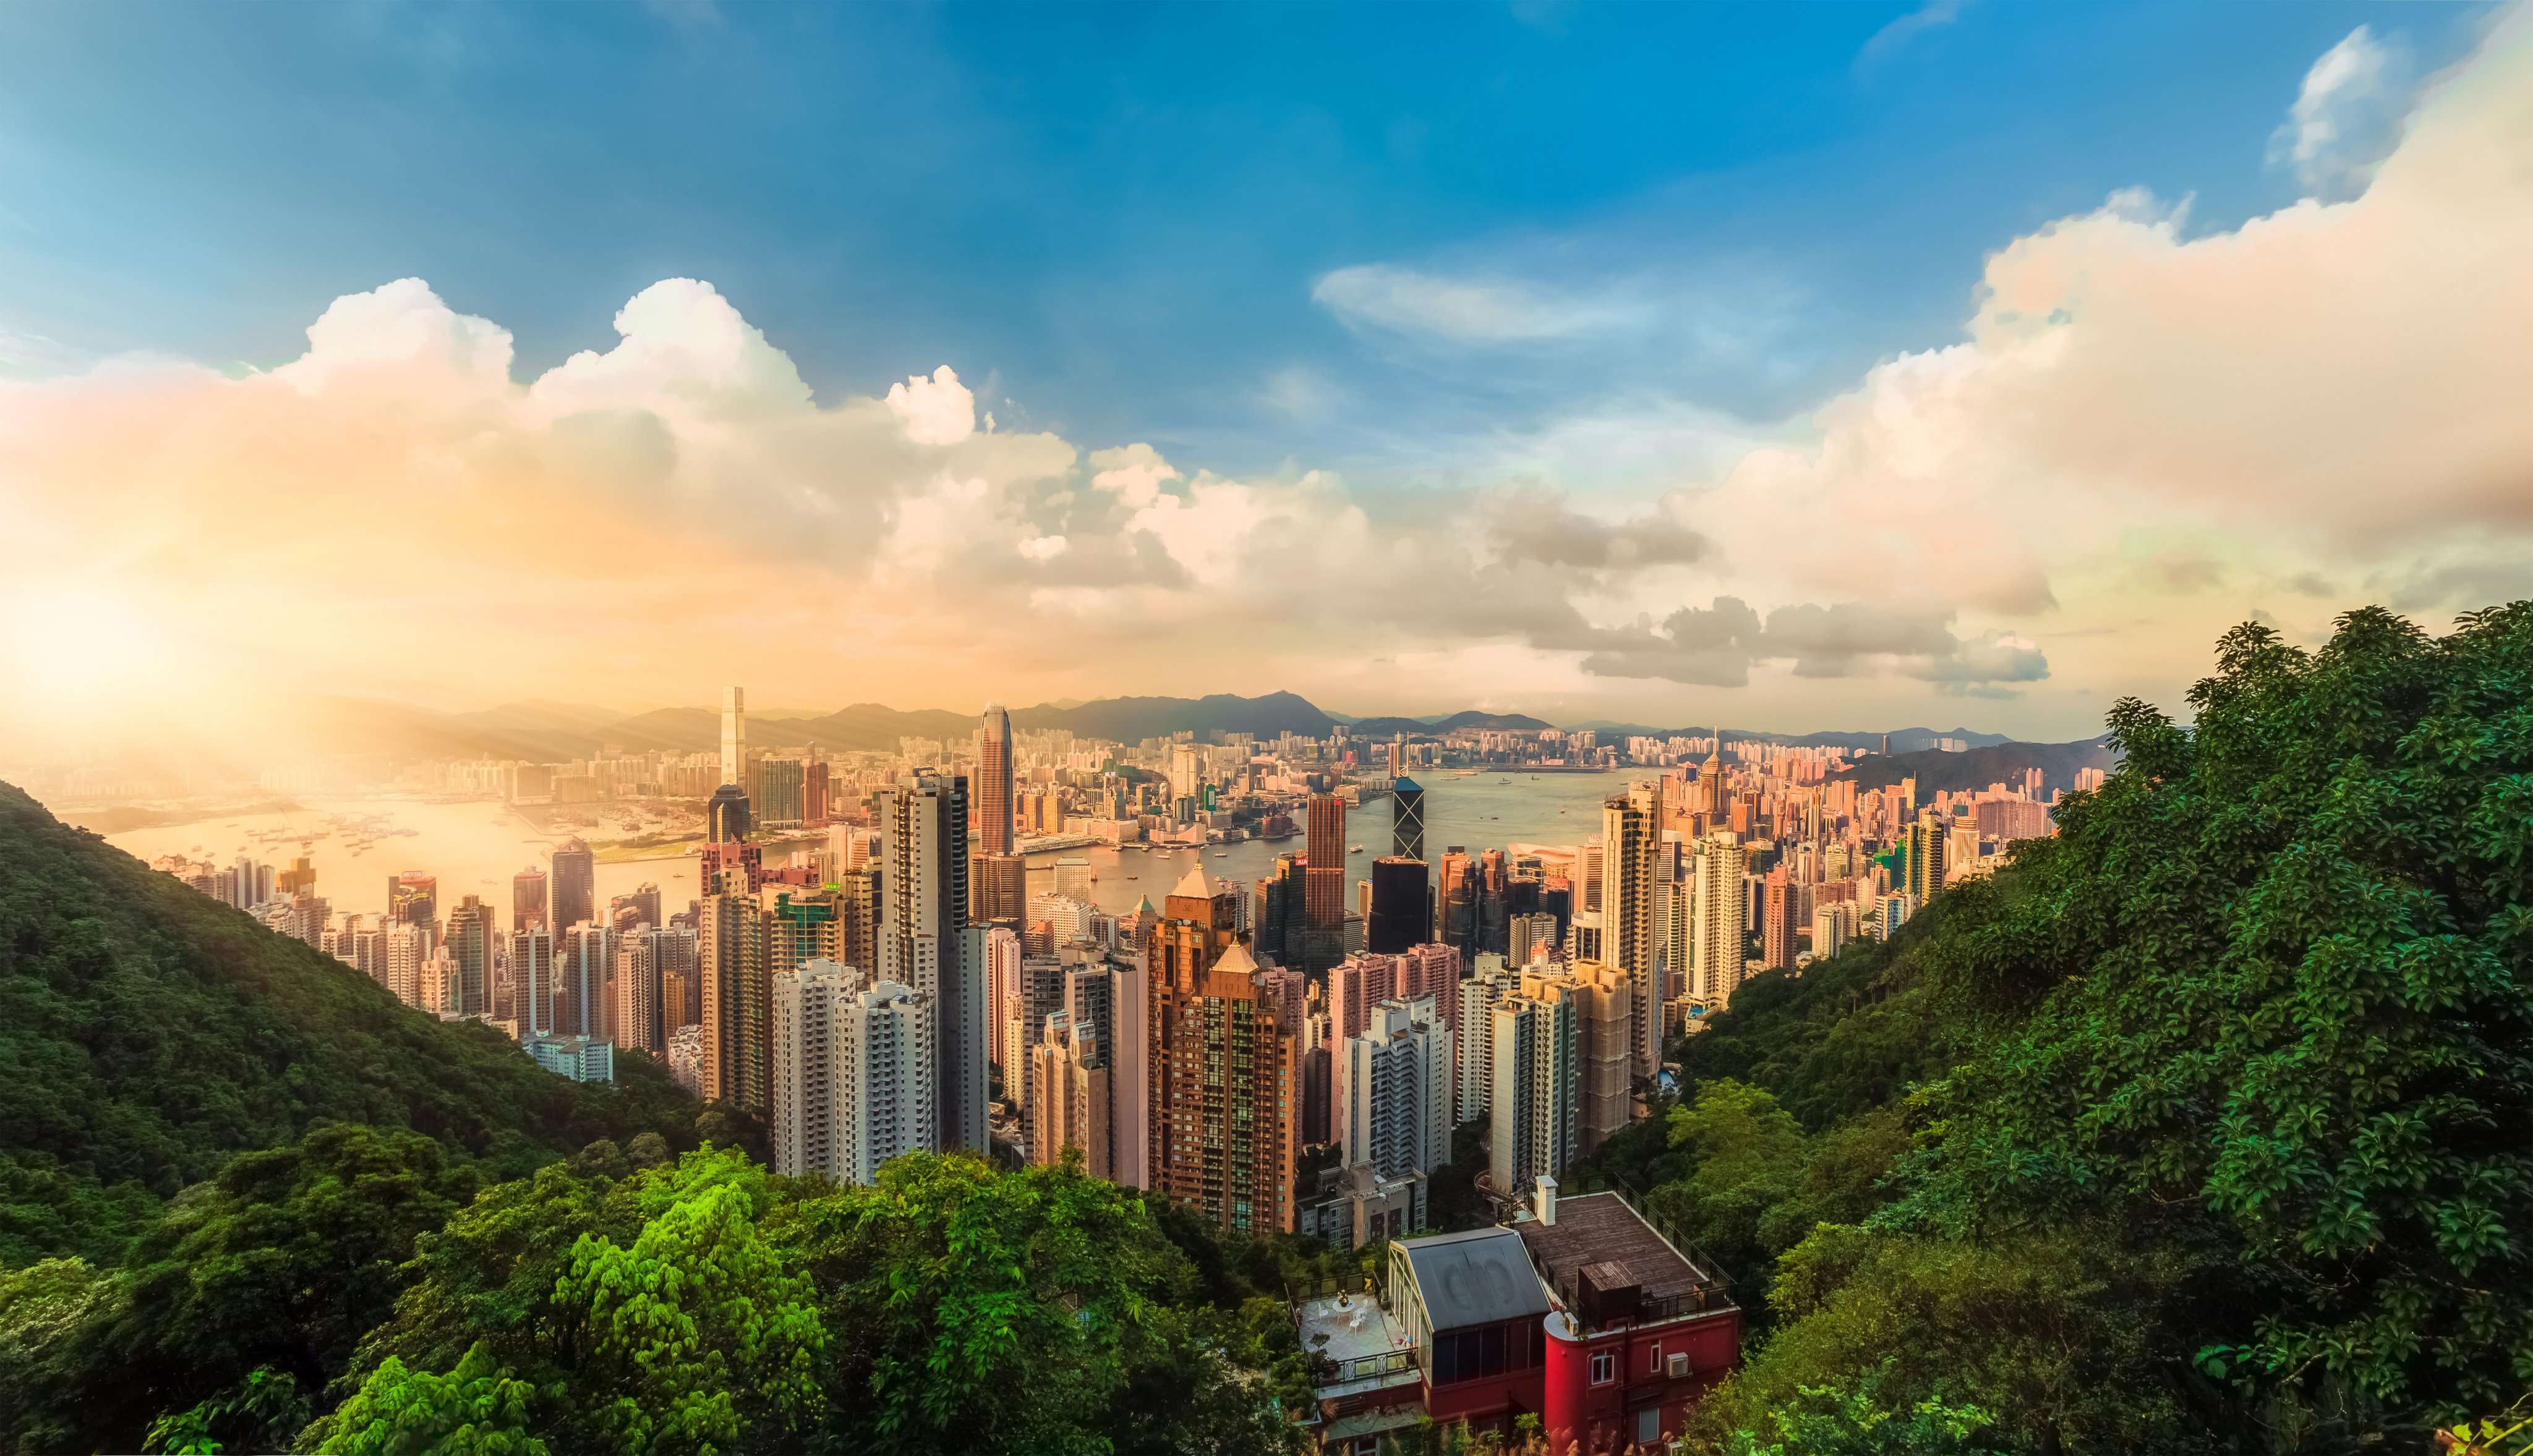 Seven Hong Kong companies have joined more than 300 firms worldwide that are committed to making disclosures on nature-related risks and opportunities. Photo: Shutterstock